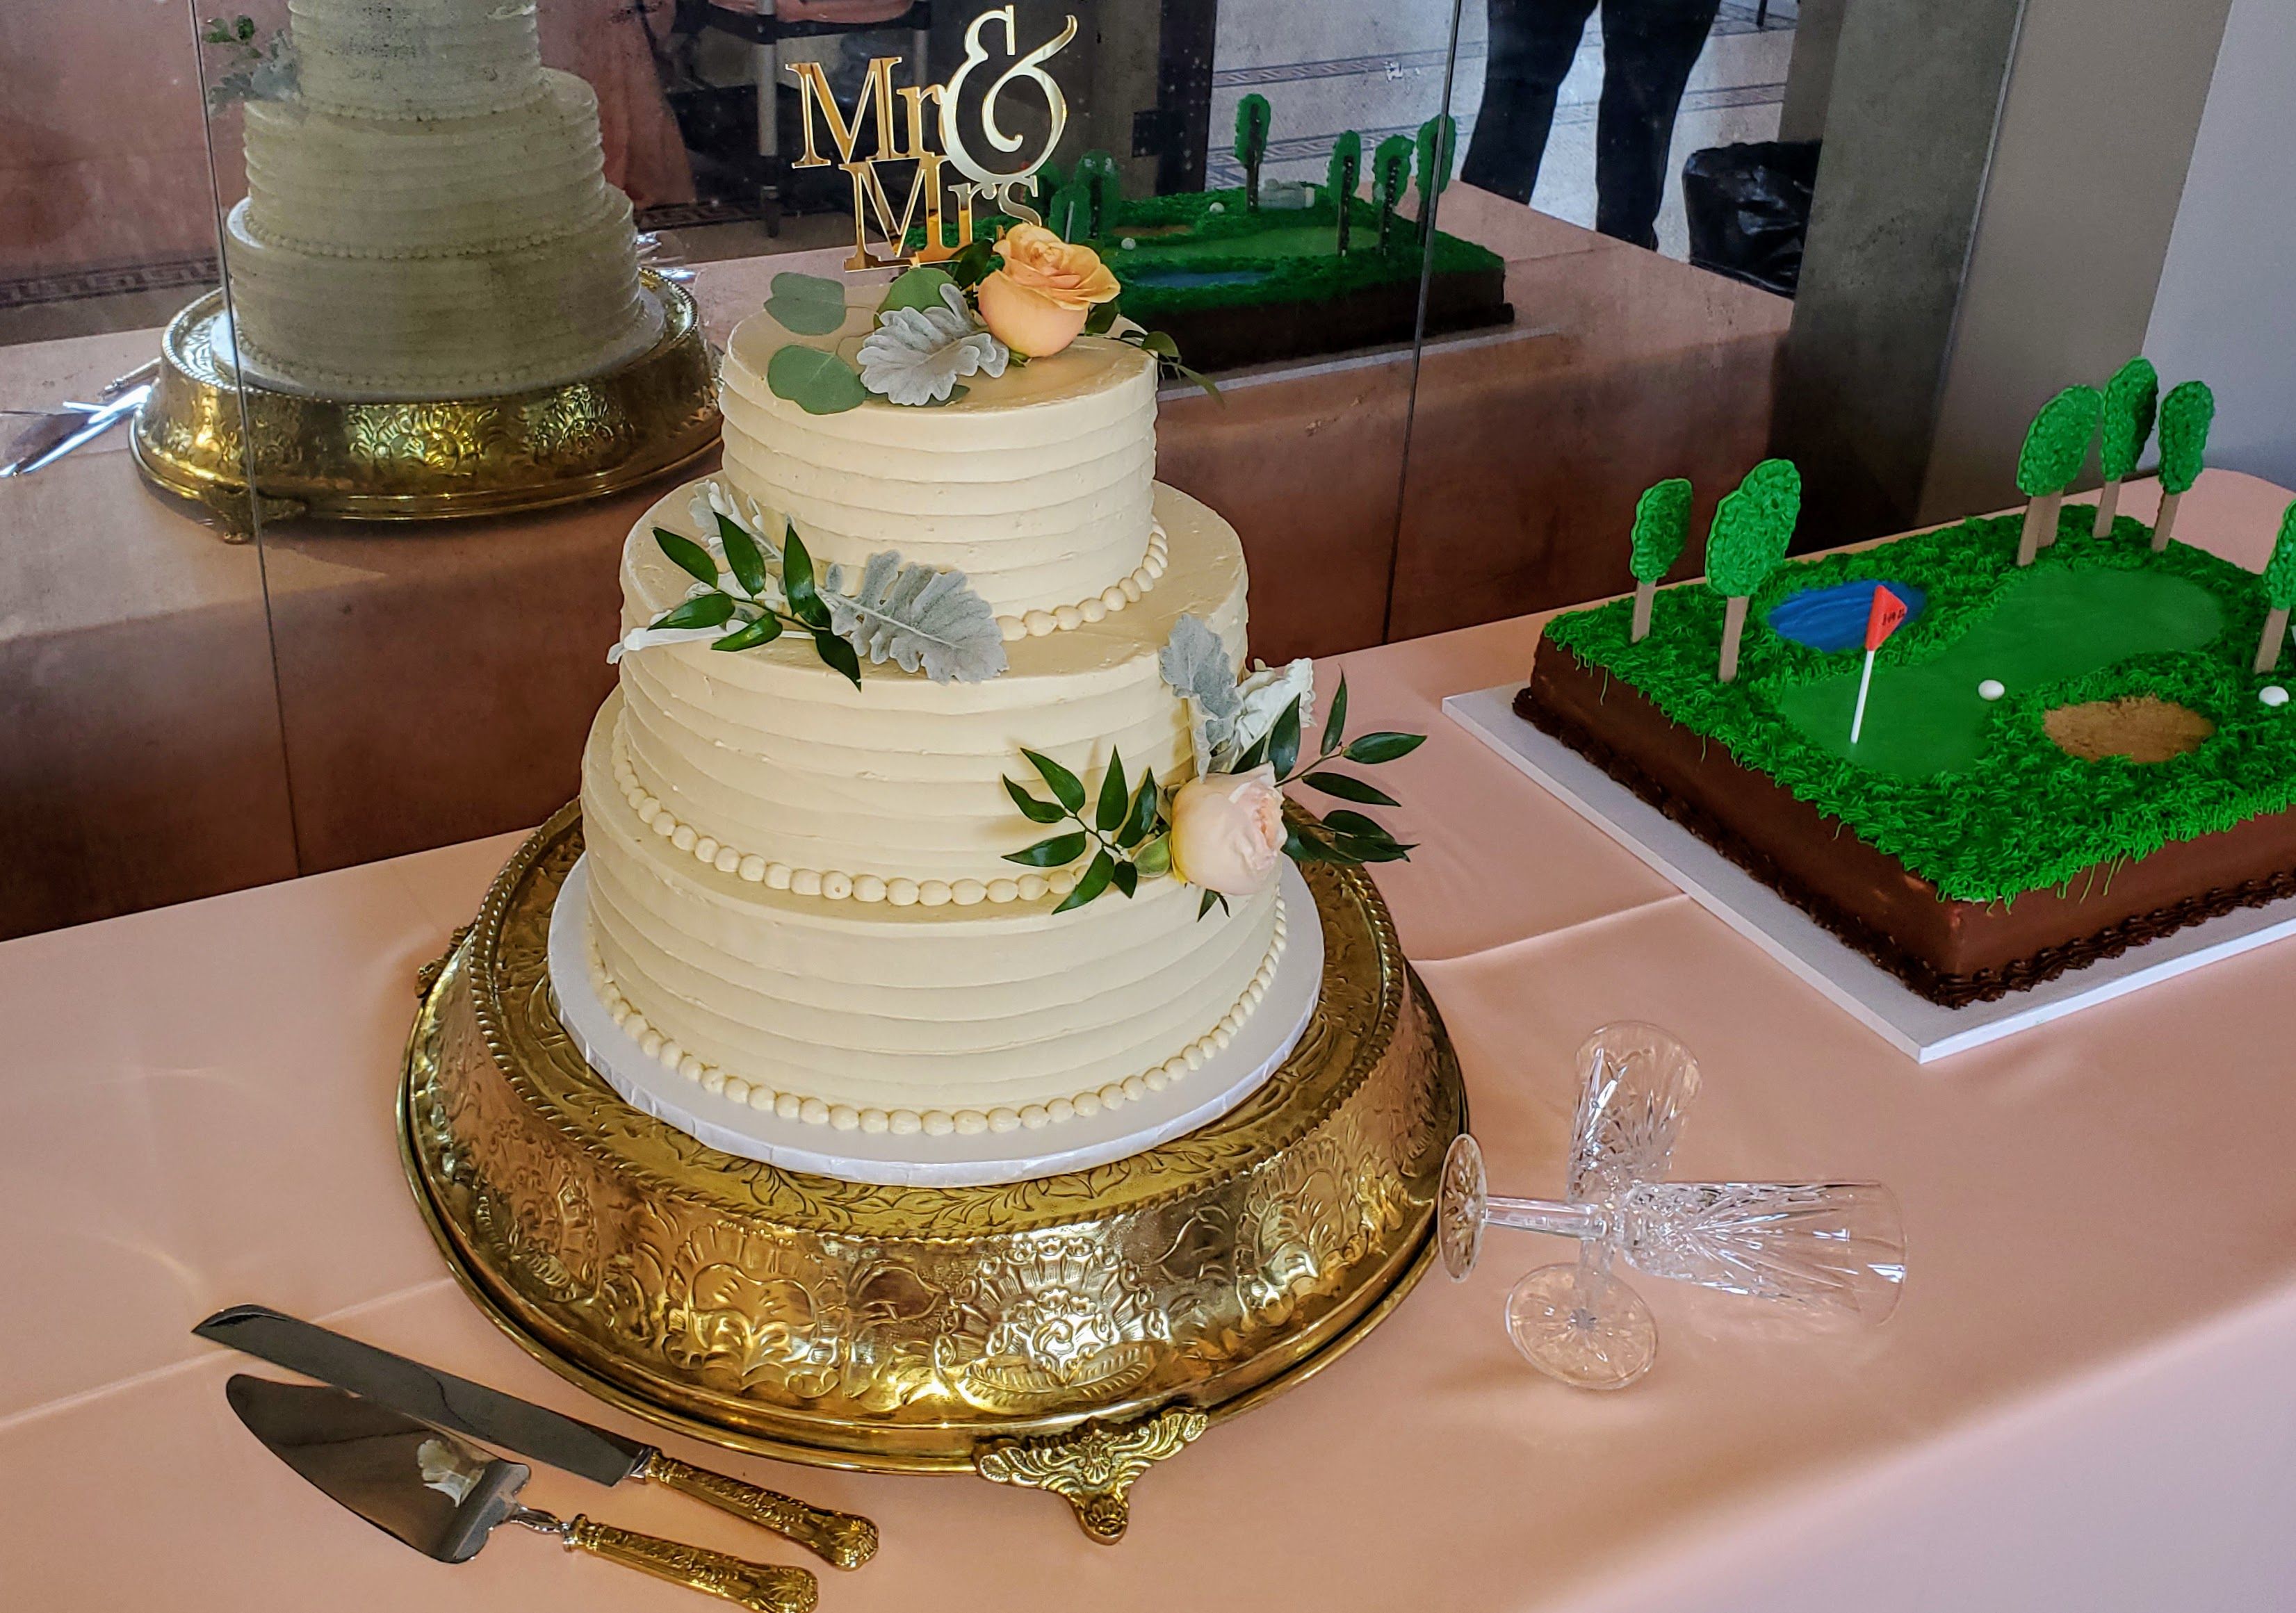 Image for post: Gluten Free and Vegan Wedding Cakes!